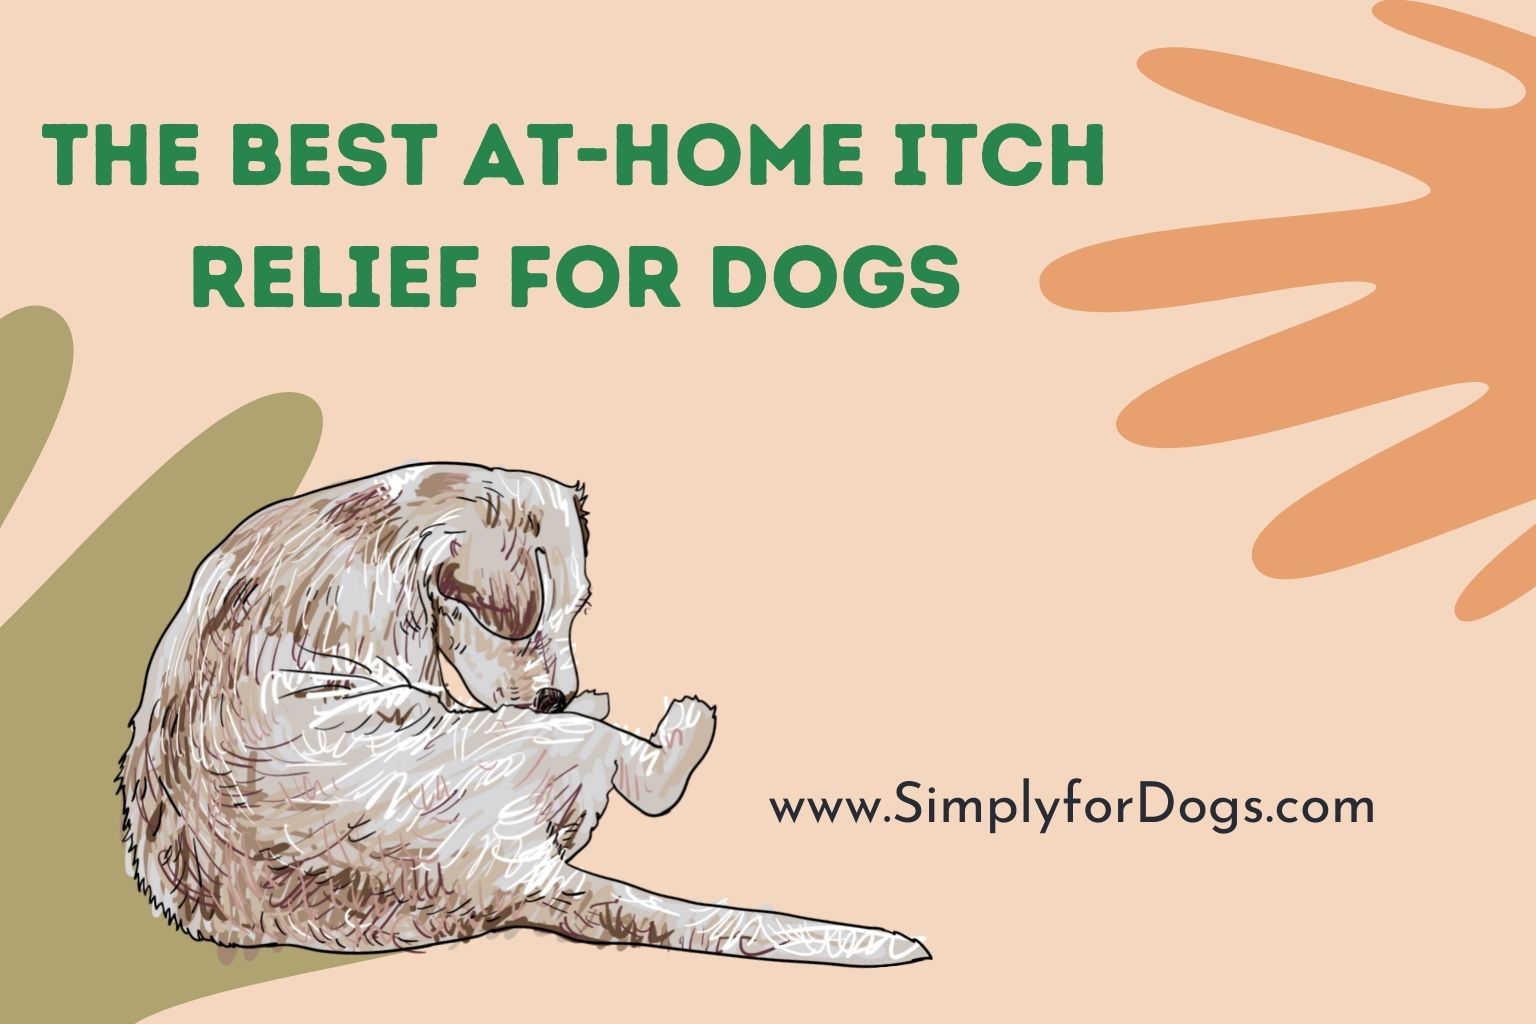 itch relief for dogs in pill form